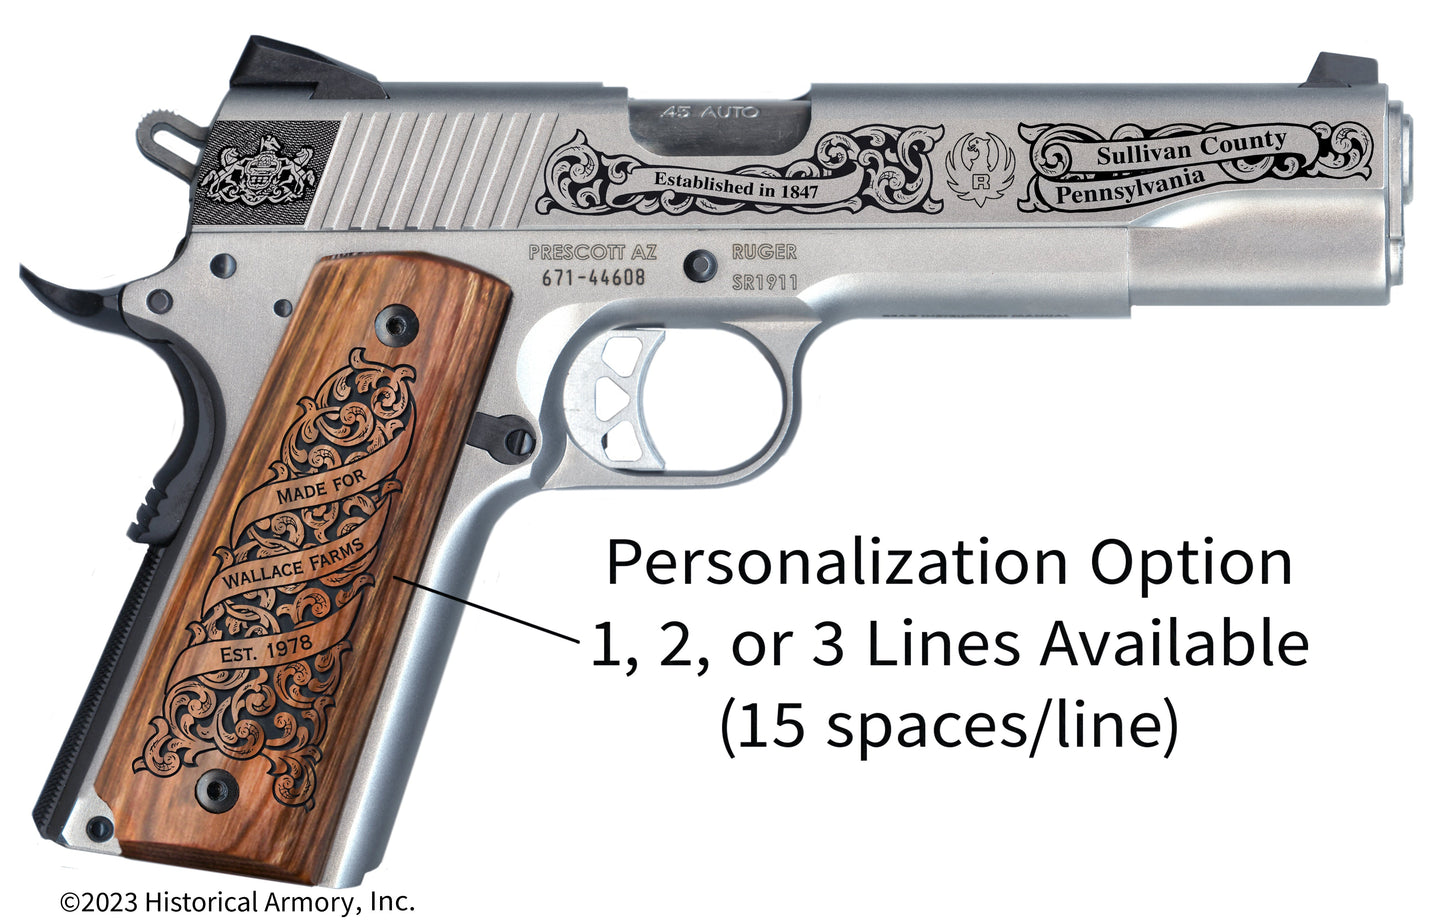 Sullivan County Pennsylvania Personalized Engraved .45 Auto Ruger 1911